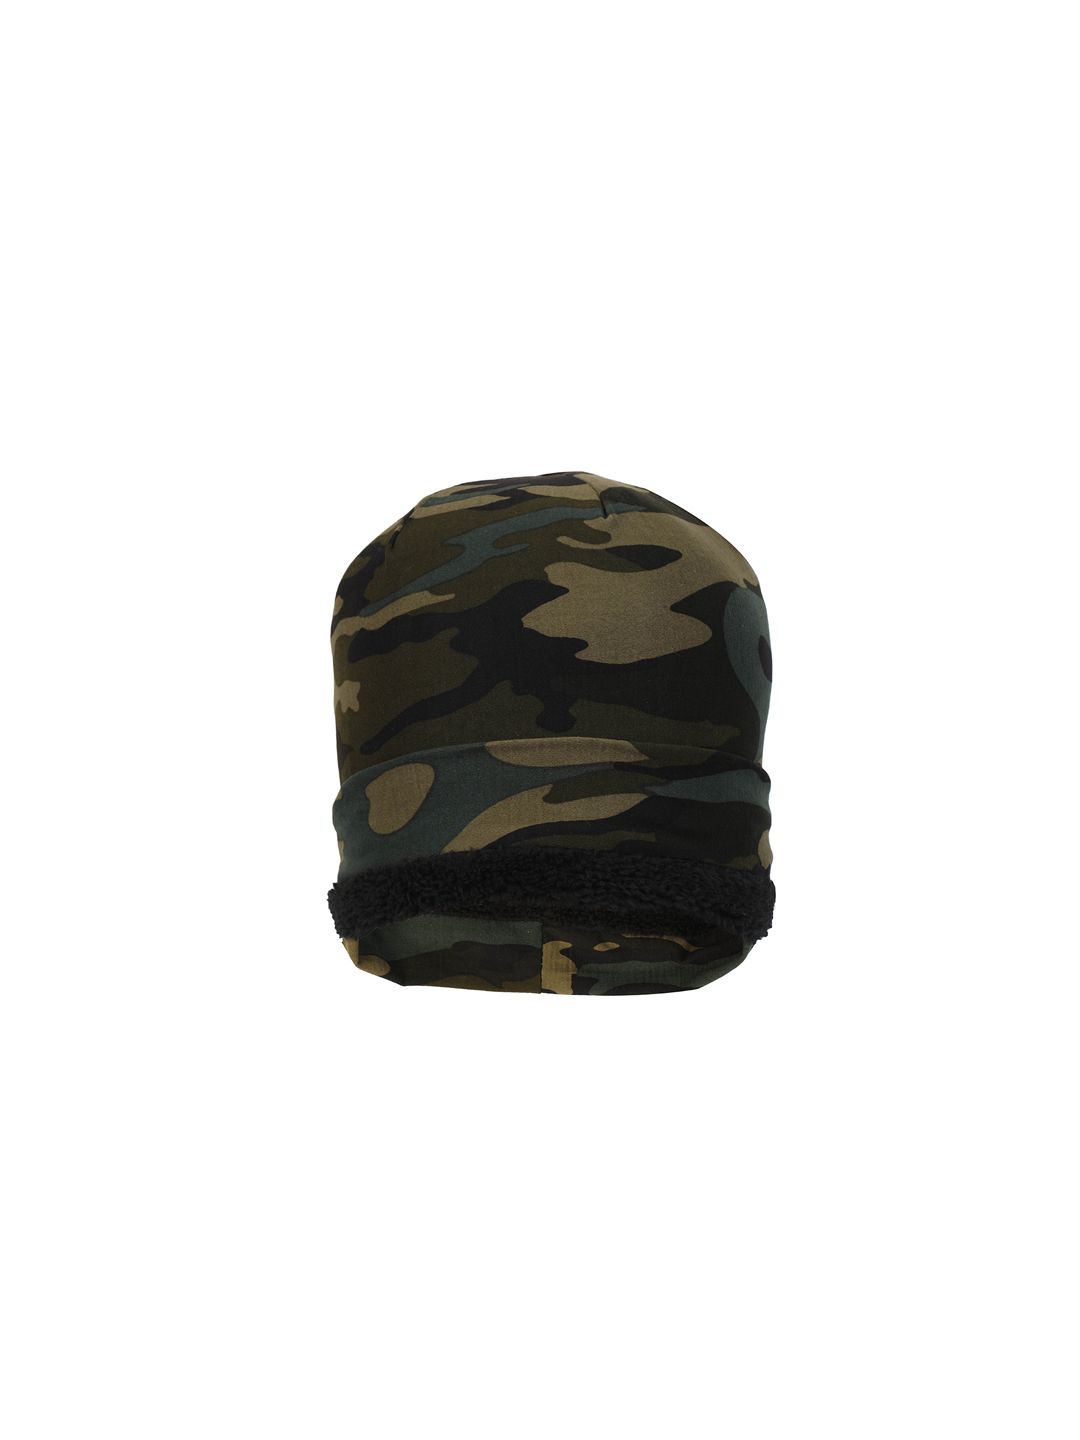 FabSeasons Unisex Green Camouflage Printed Beanie Price in India